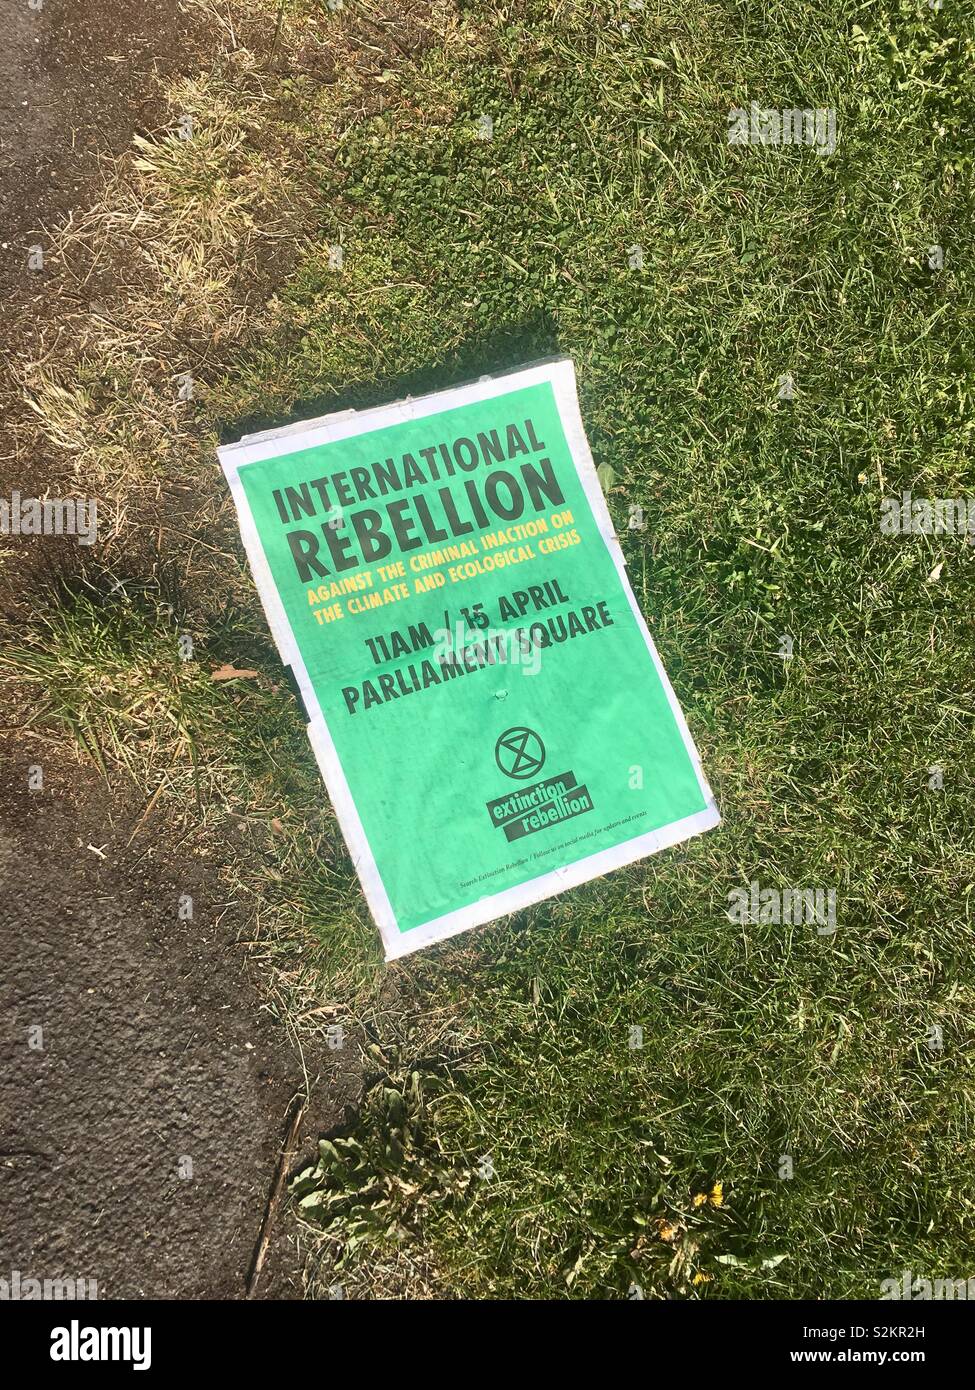 International Rebellion poster to take action against climate change on 15th April, 2019 discarded as litter on ground Stock Photo